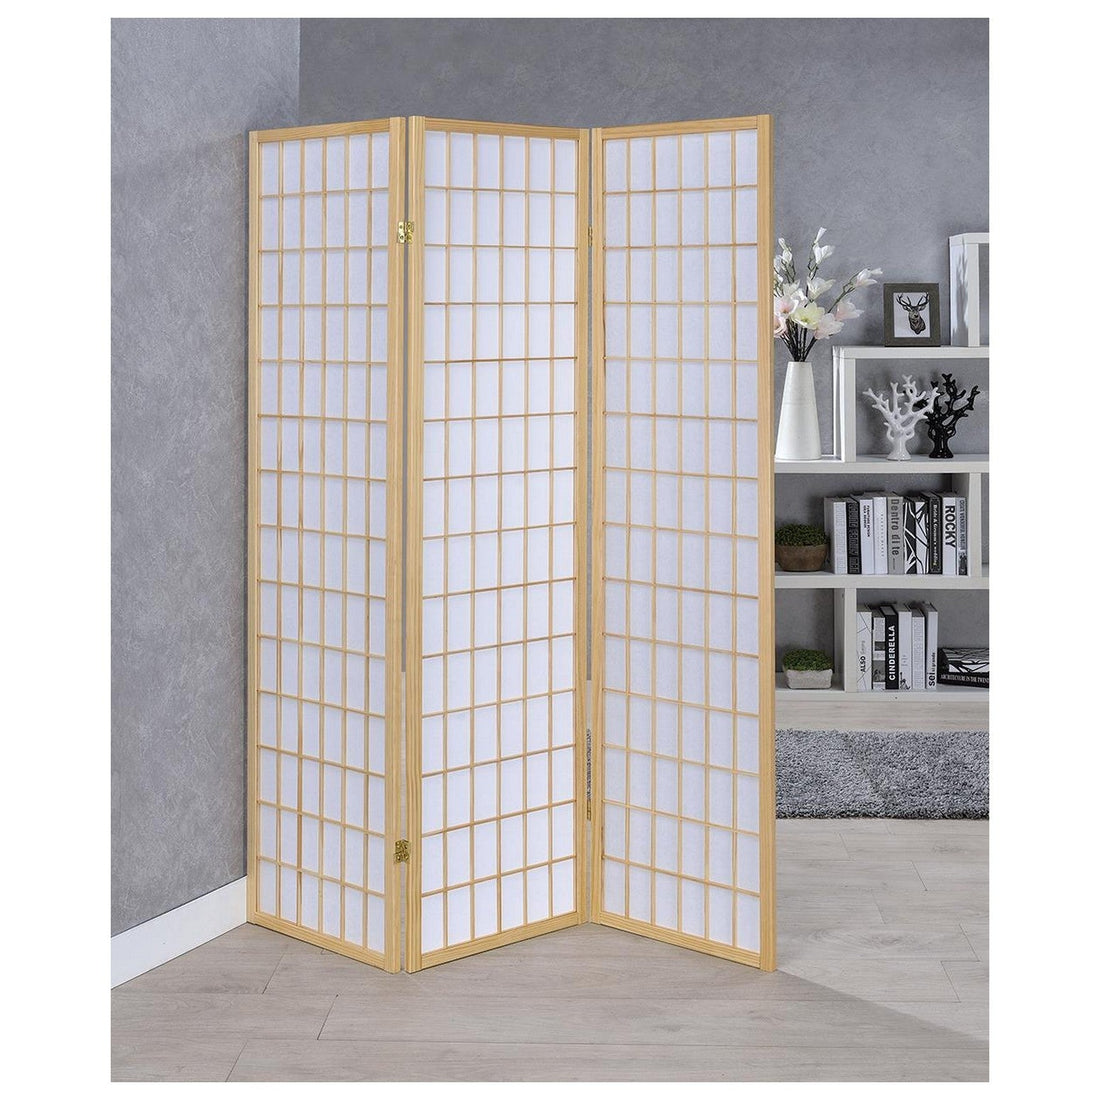 Carrie 3-panel Folding Screen Natural and White 4621